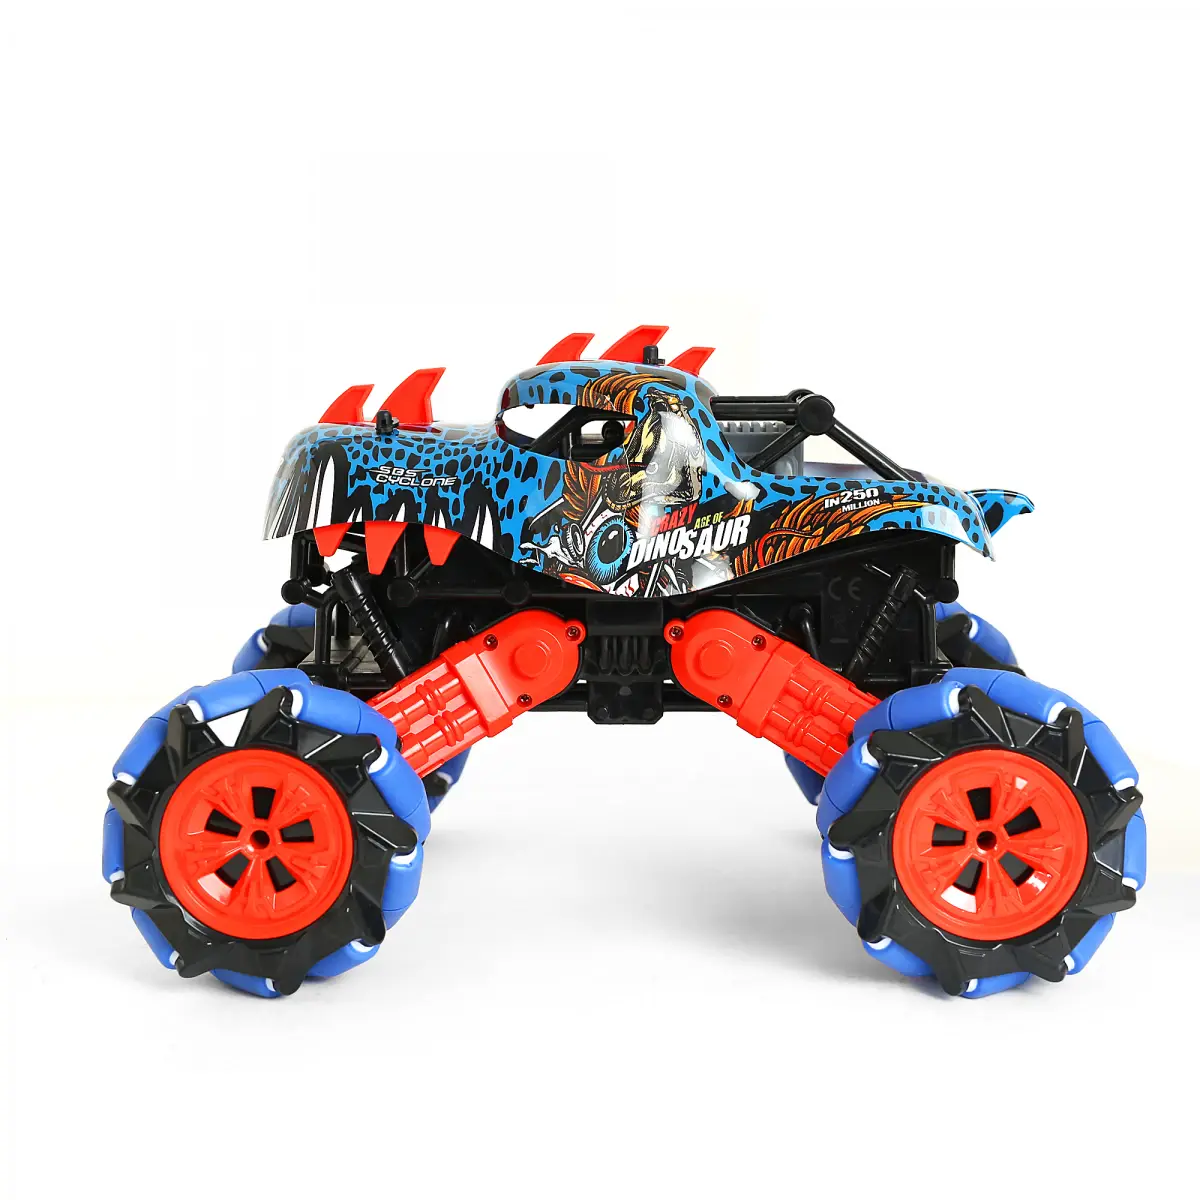 Ralleyz Drifting Crossroad Beast Remote Control Toys for Kids, 4Y, Red